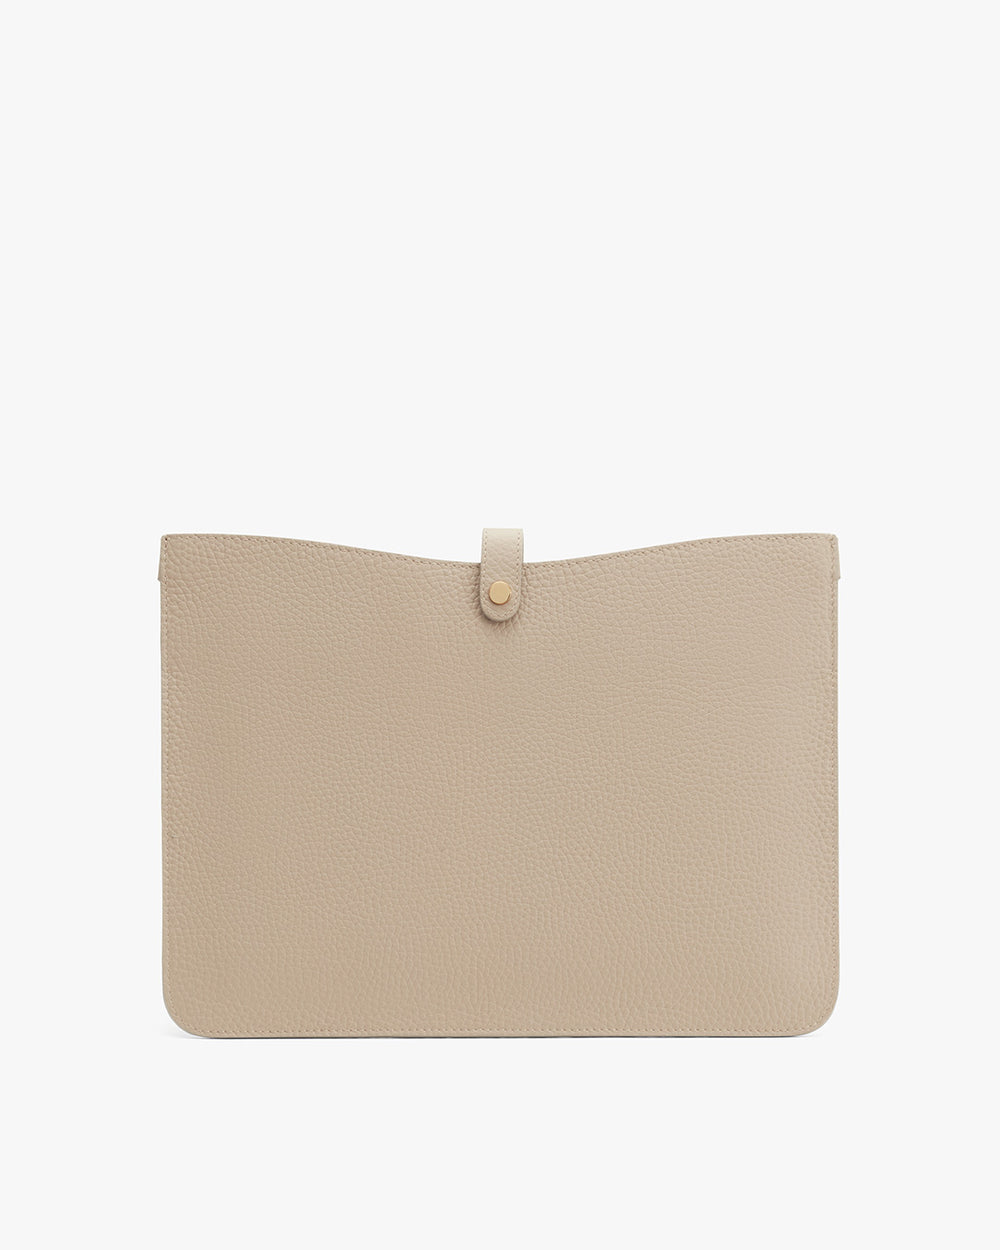 Leather pouch with flap closure and visible texture.